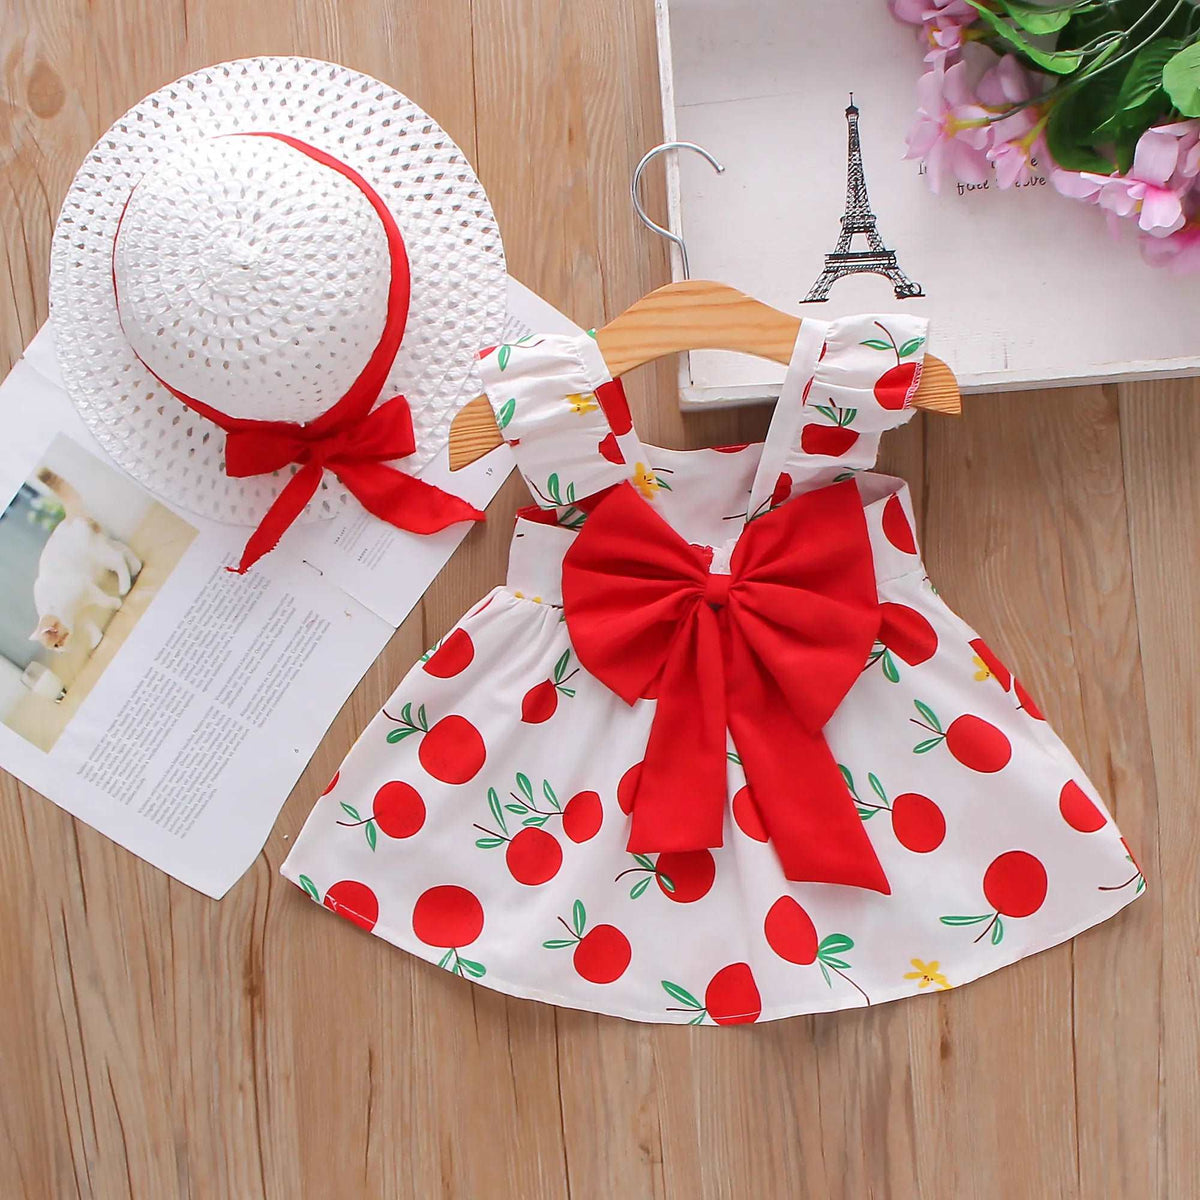 Baby  Dress with Fruit Print - Adorable and Stylish for Your Little One